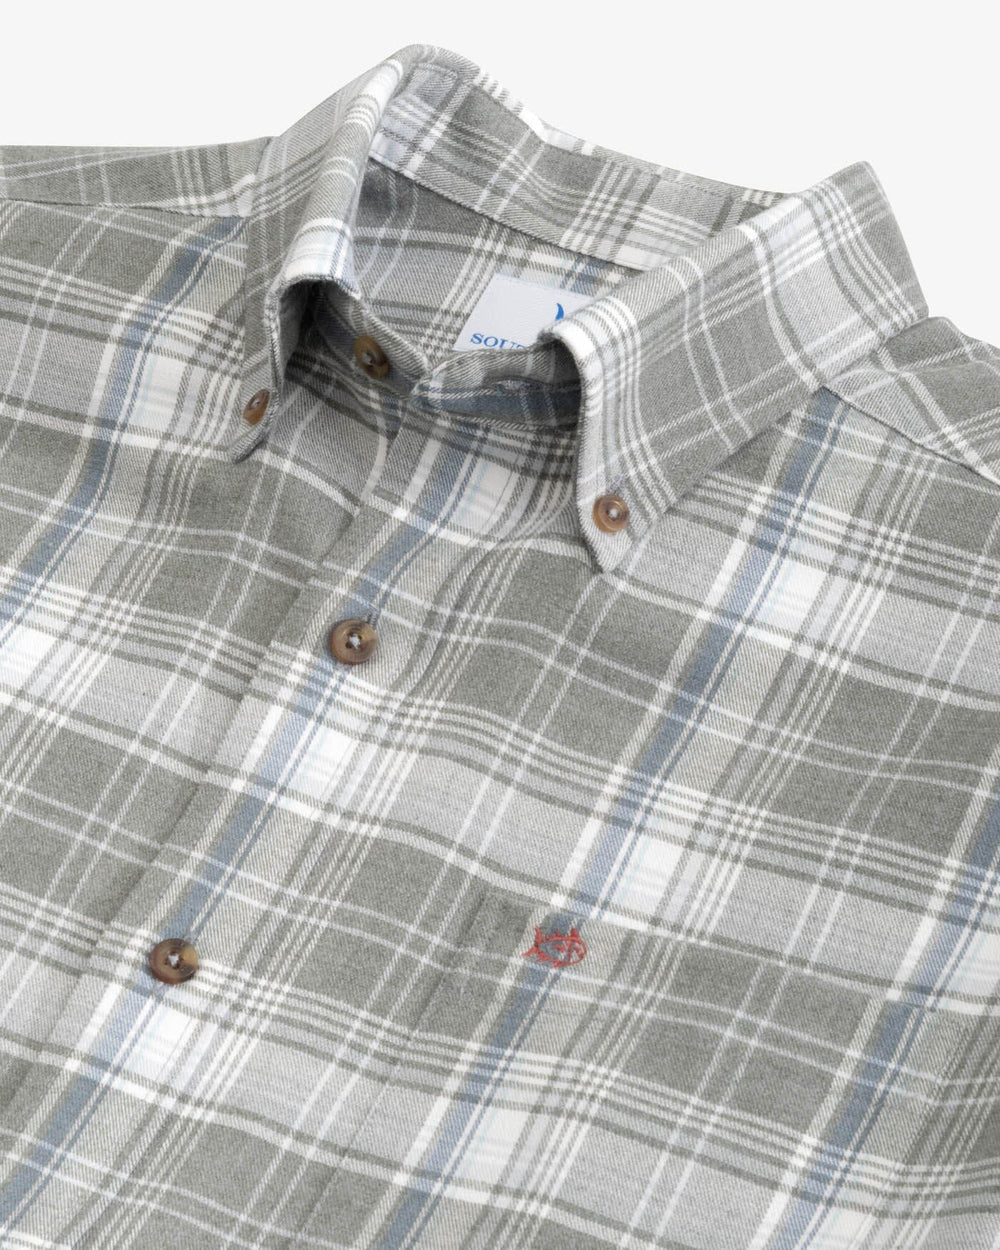 The detail view of the Southern Tide Heather Longleaf Plaid Intercoastal Flannel Sport Shirts by Southern Tide - Heather Shadow Grey